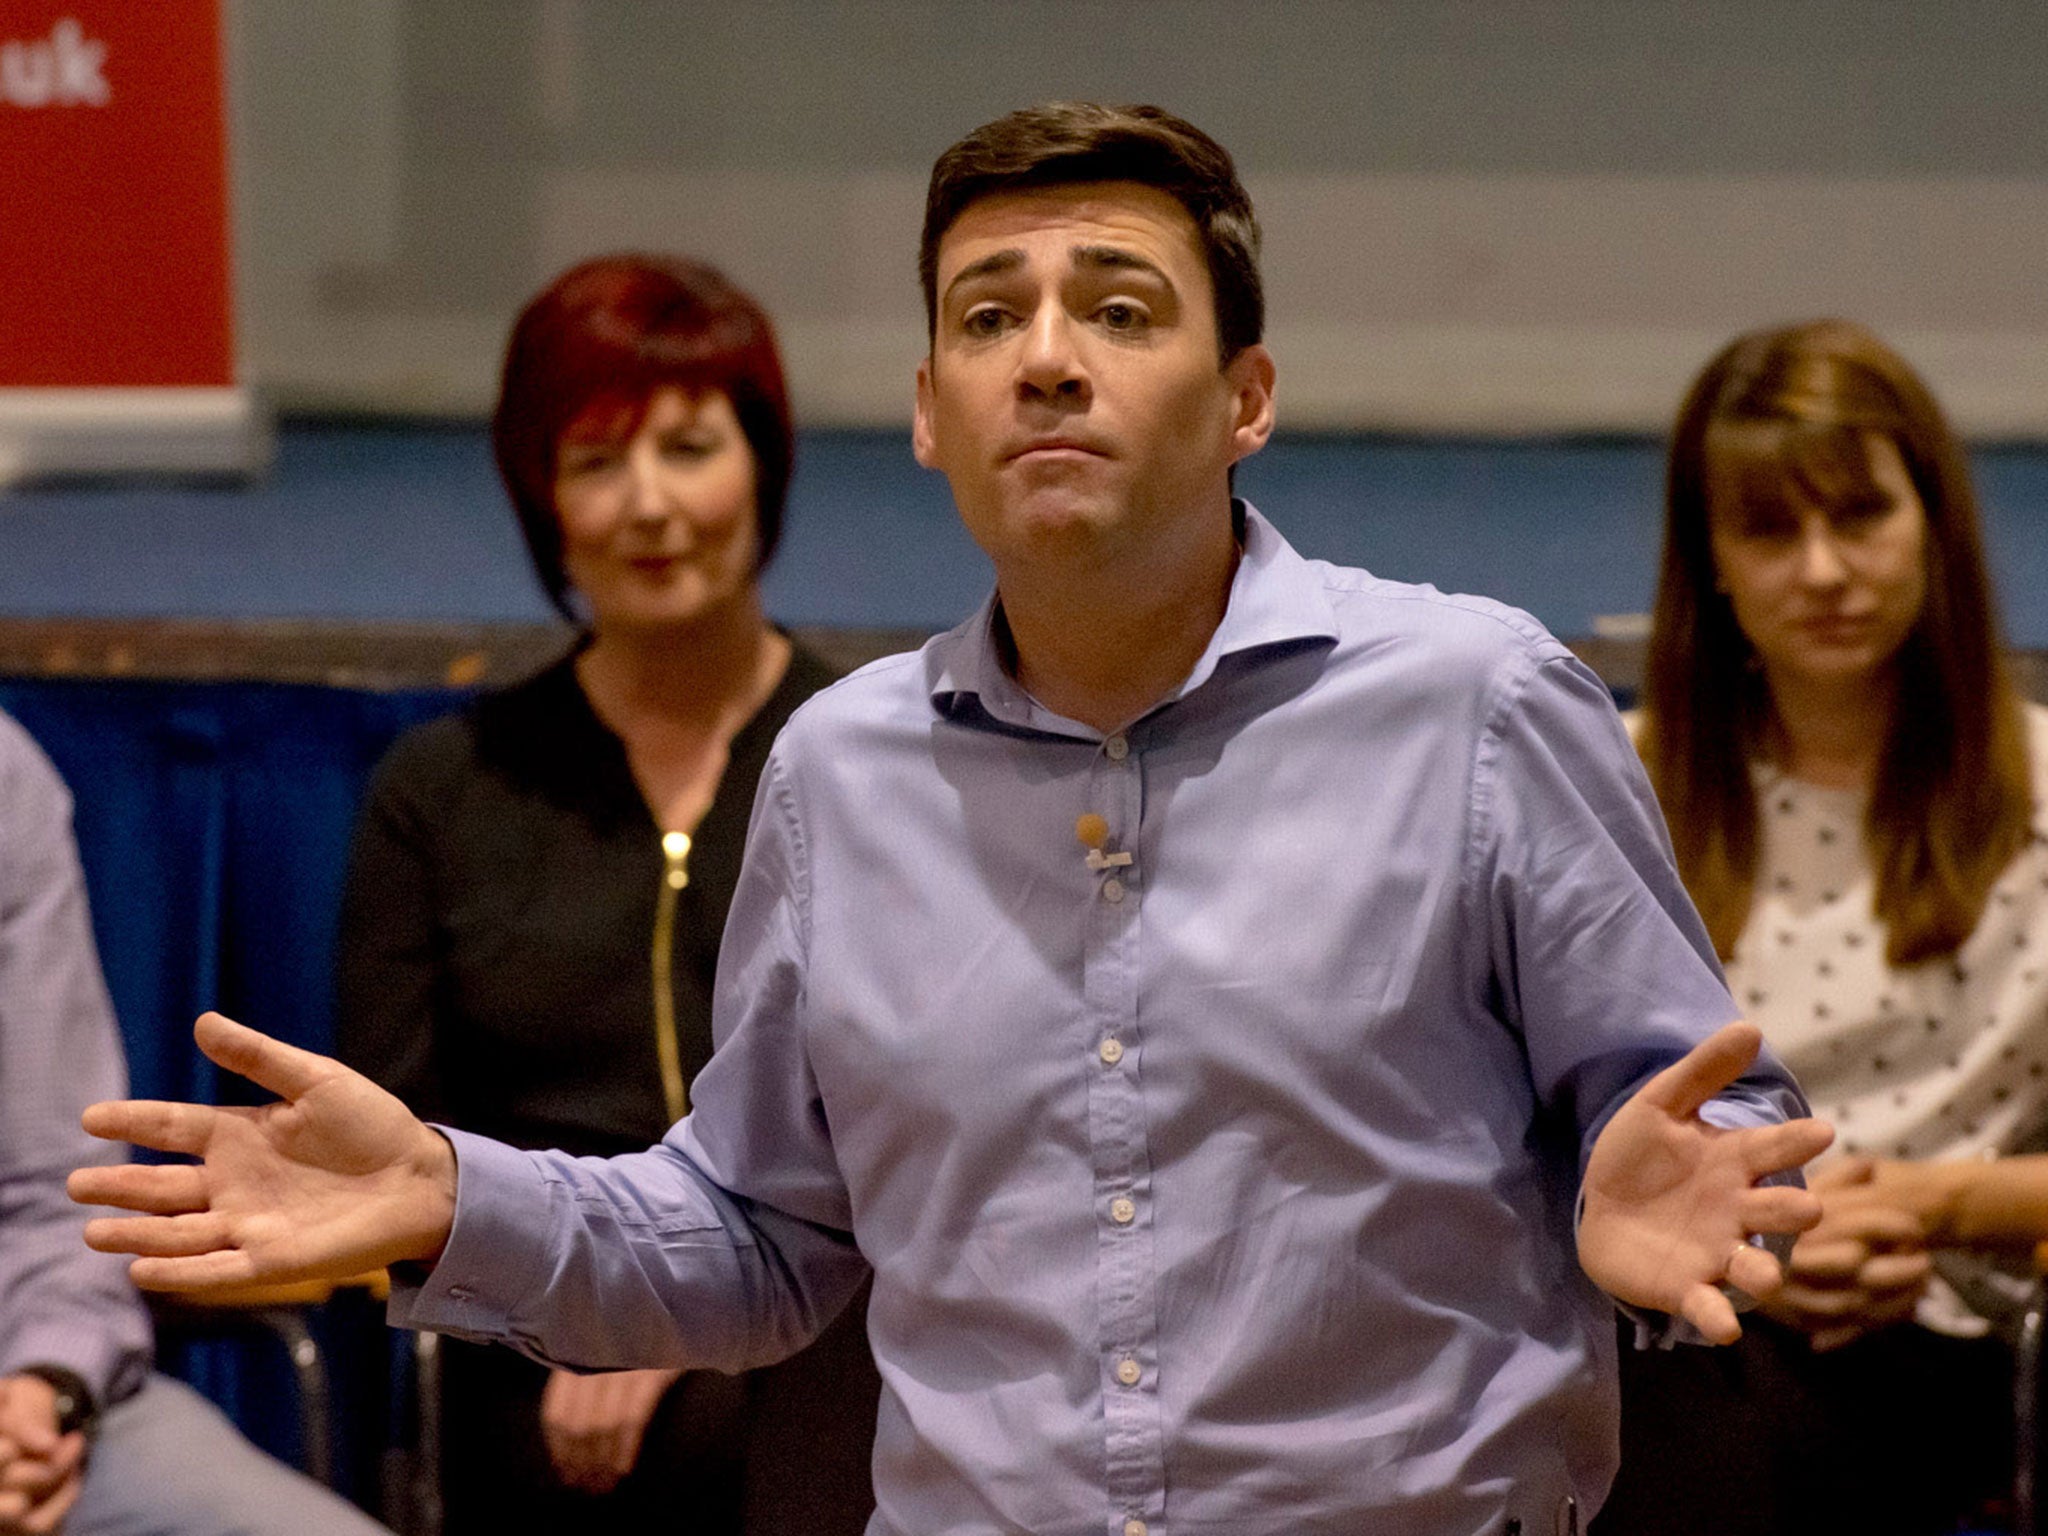 Andy Burnham has announced his candidancy in the Manchester mayoral race